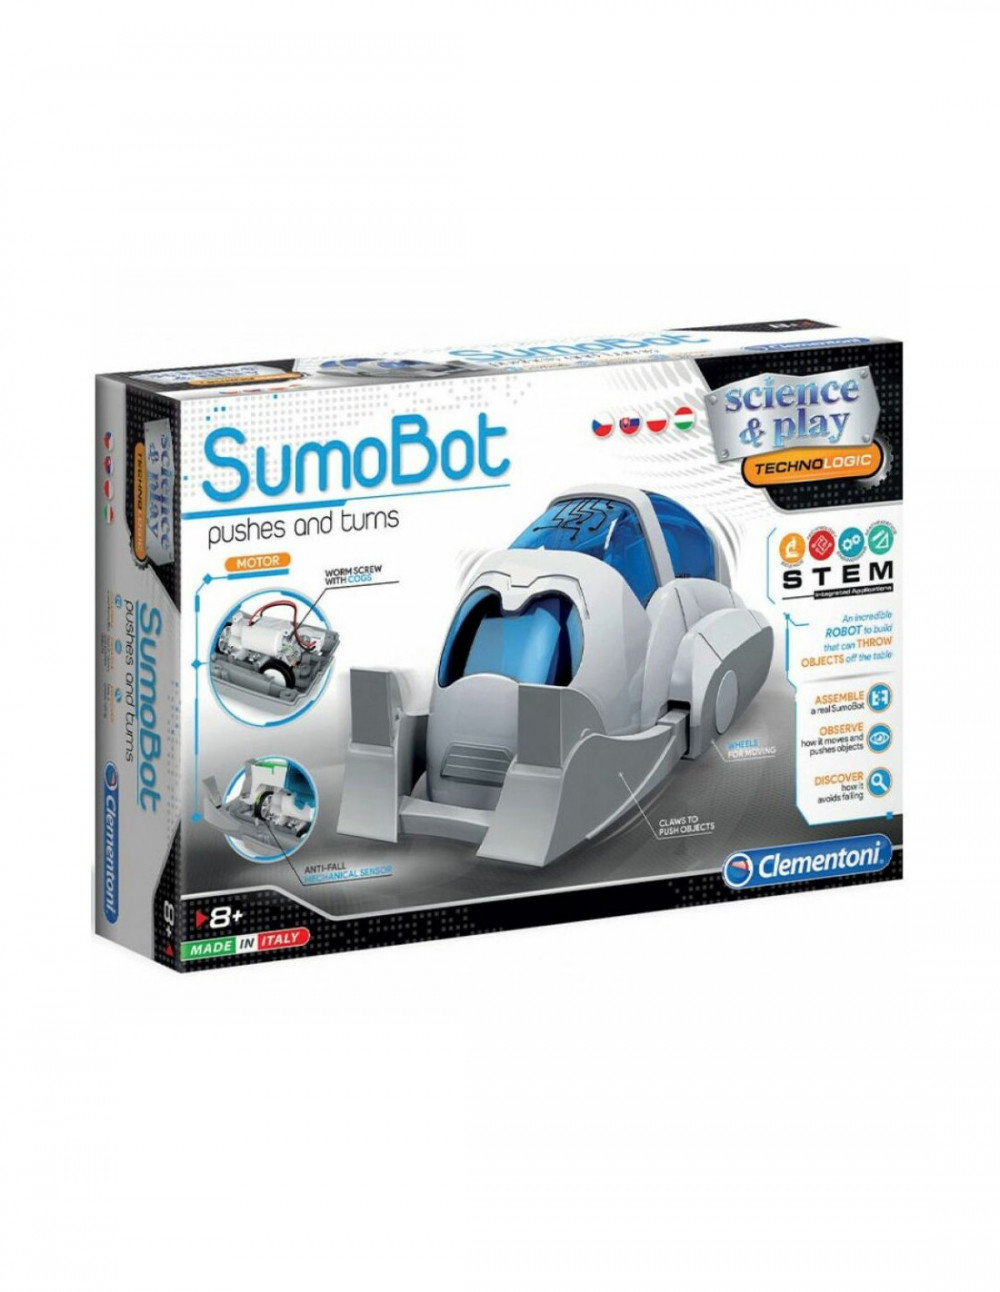 Clementoni Science and Play - SumoBot robotfigura (50312)